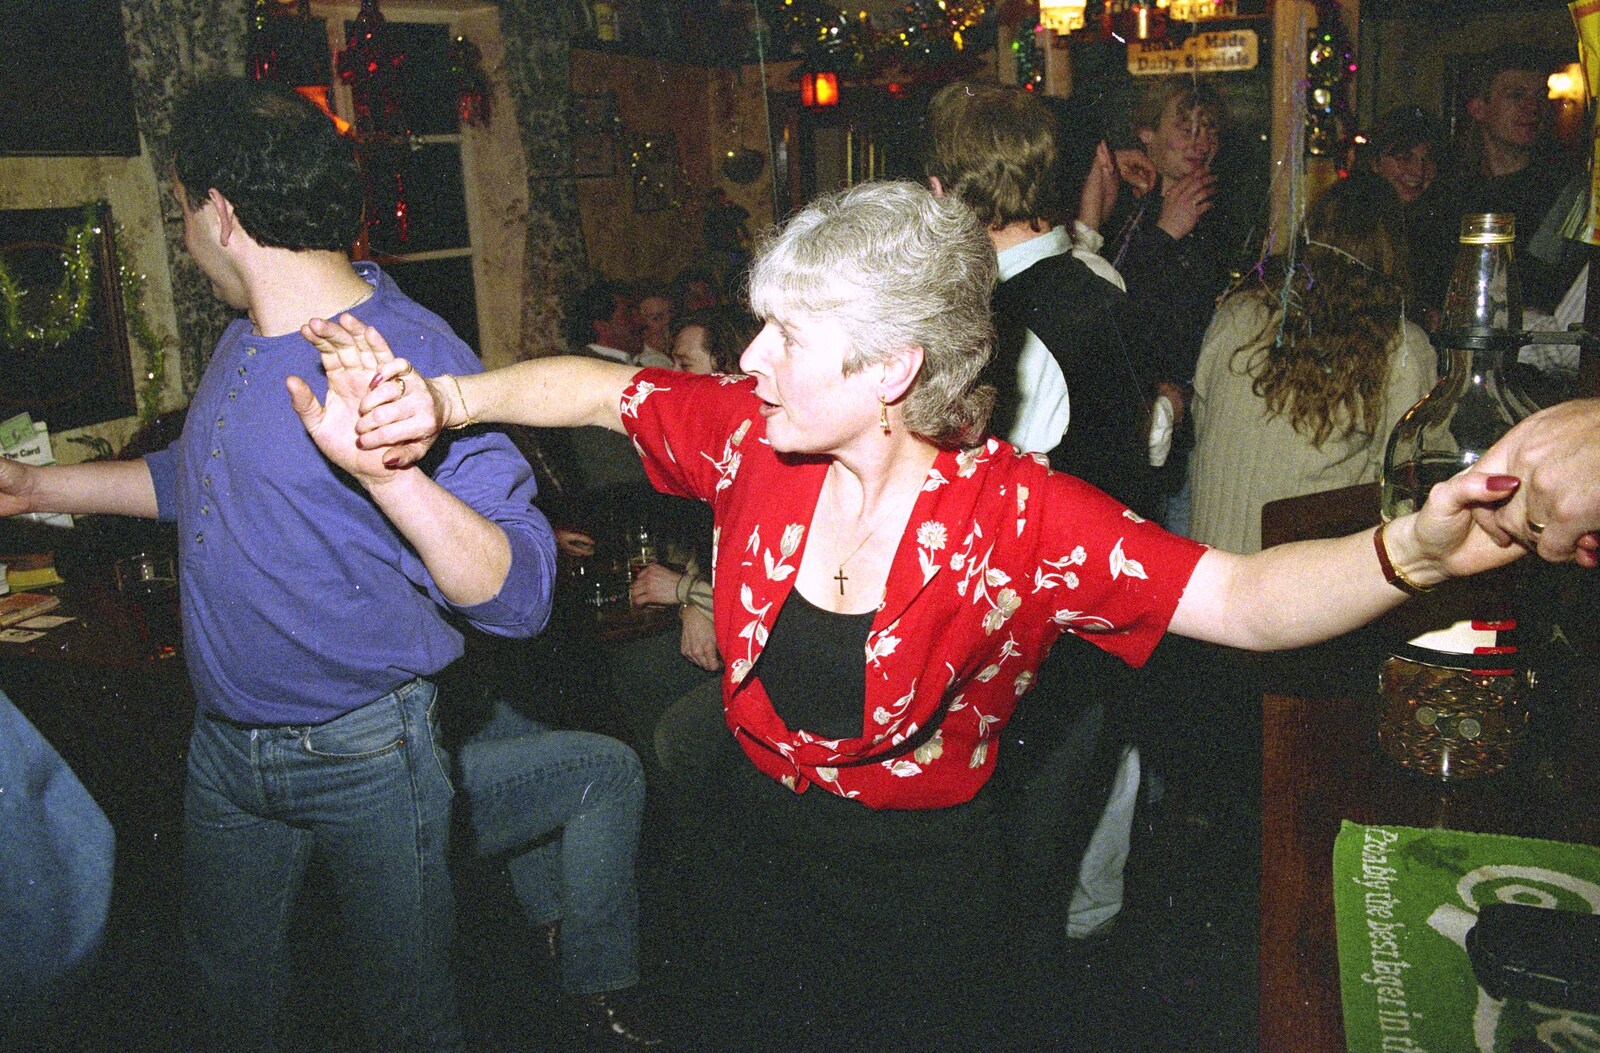 Spam holds hands from New Year's Eve in the Swan Inn, Brome, Suffolk - 31st December 1995